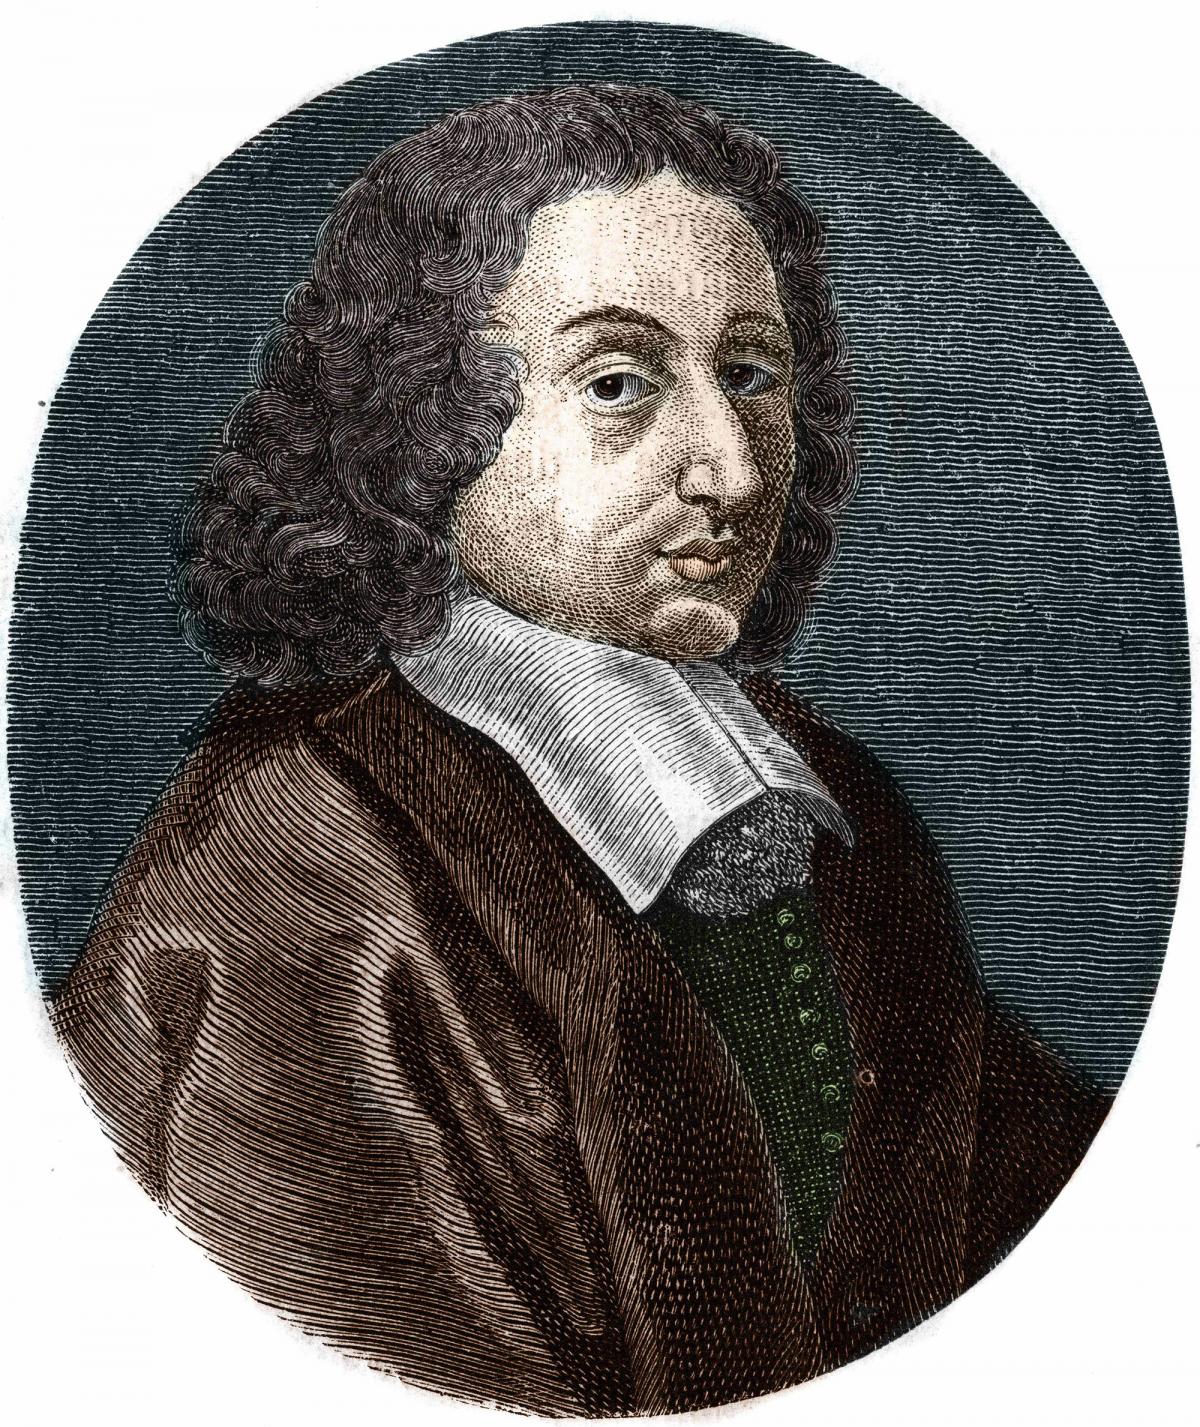 tinted portrait of Blaise Pascal